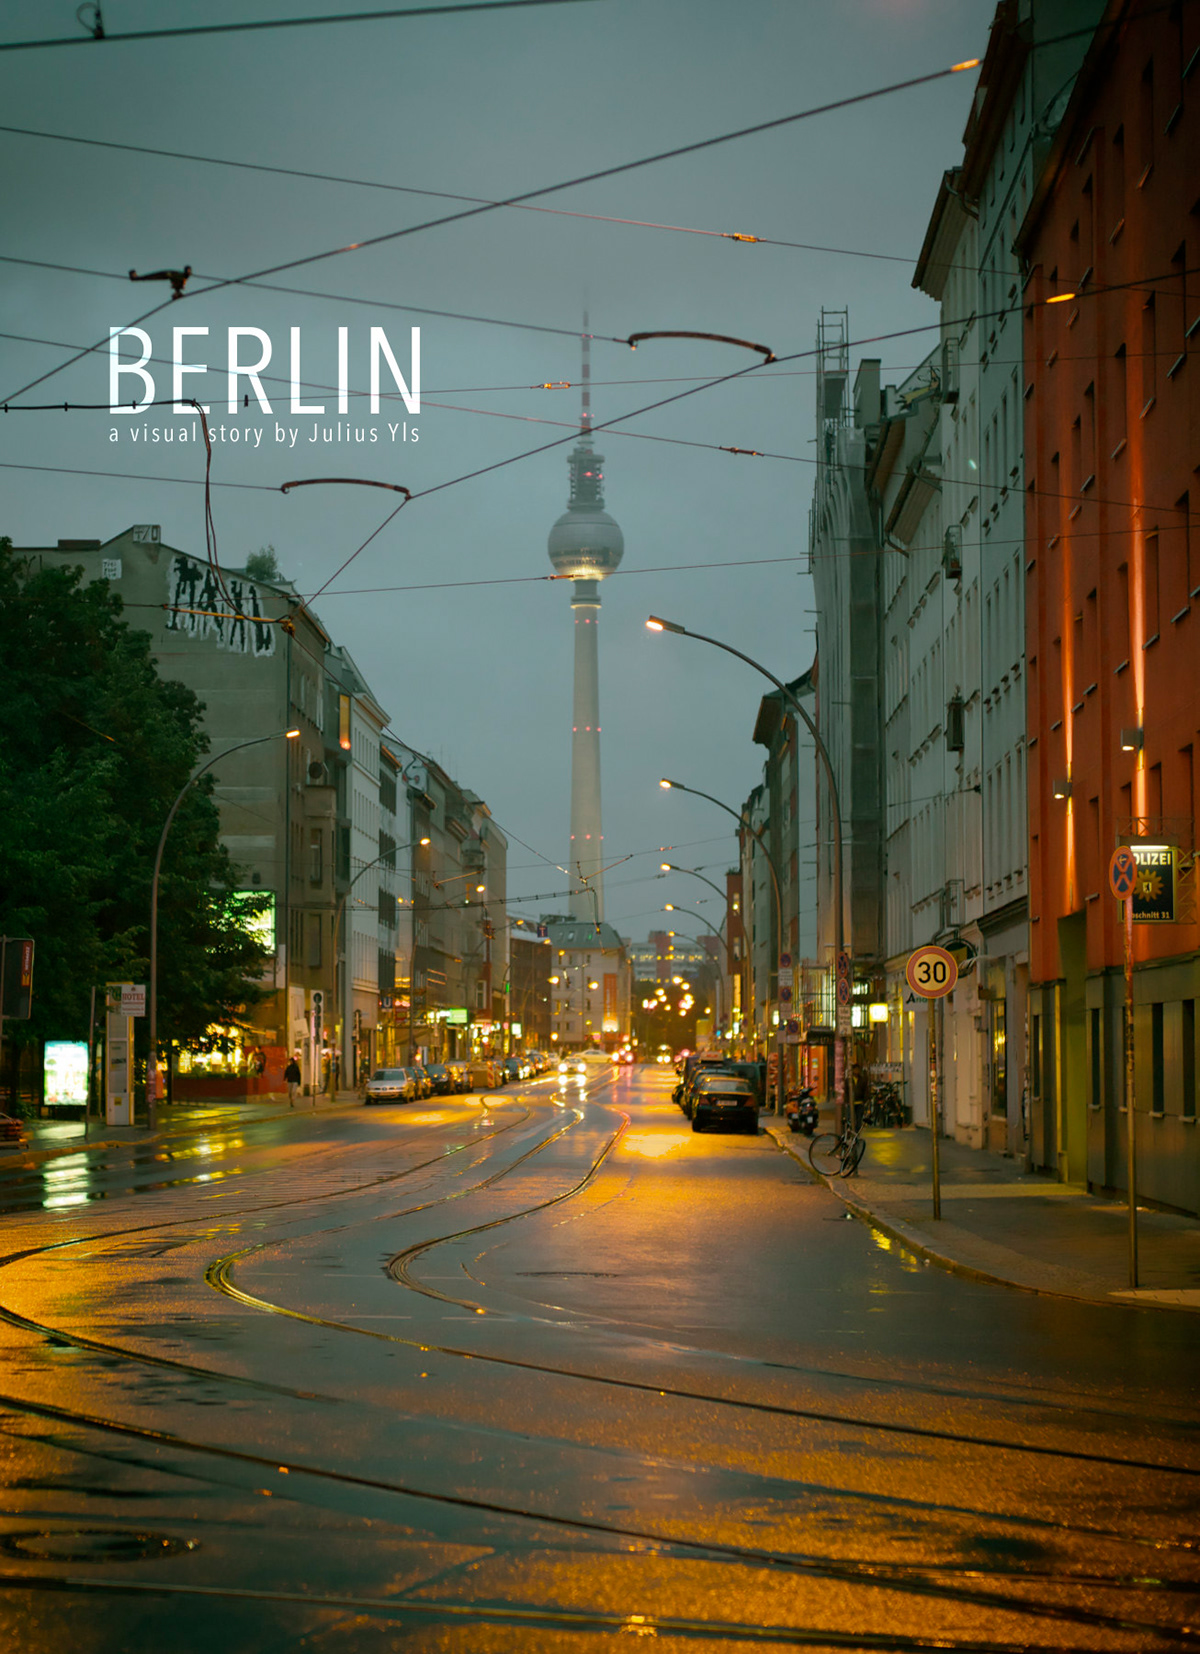 image of Berlin street with the Fernsehturm tower on the background.